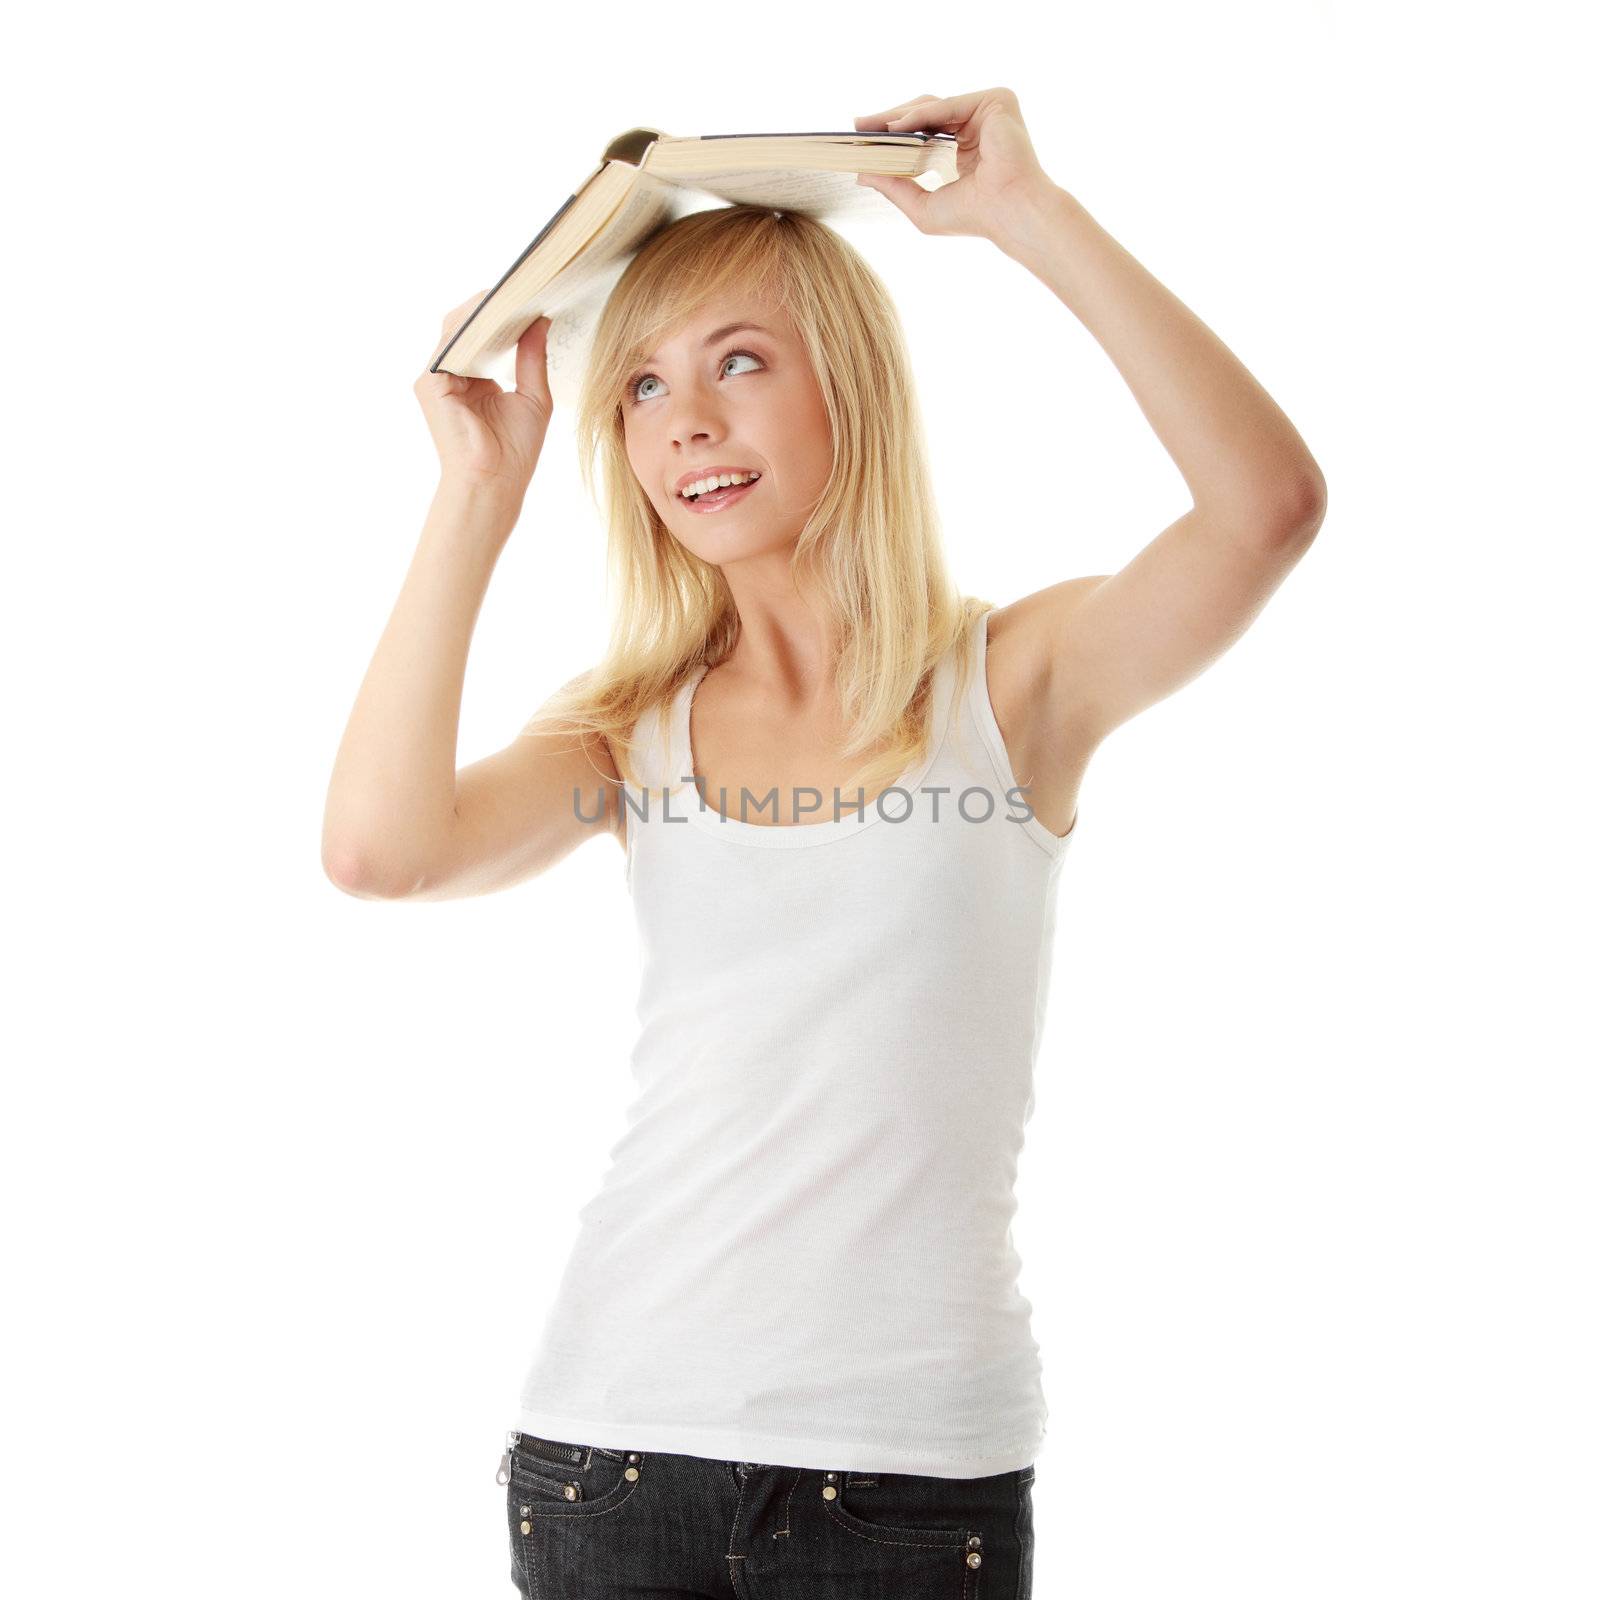 Teen girl with book over her head, isolated on white